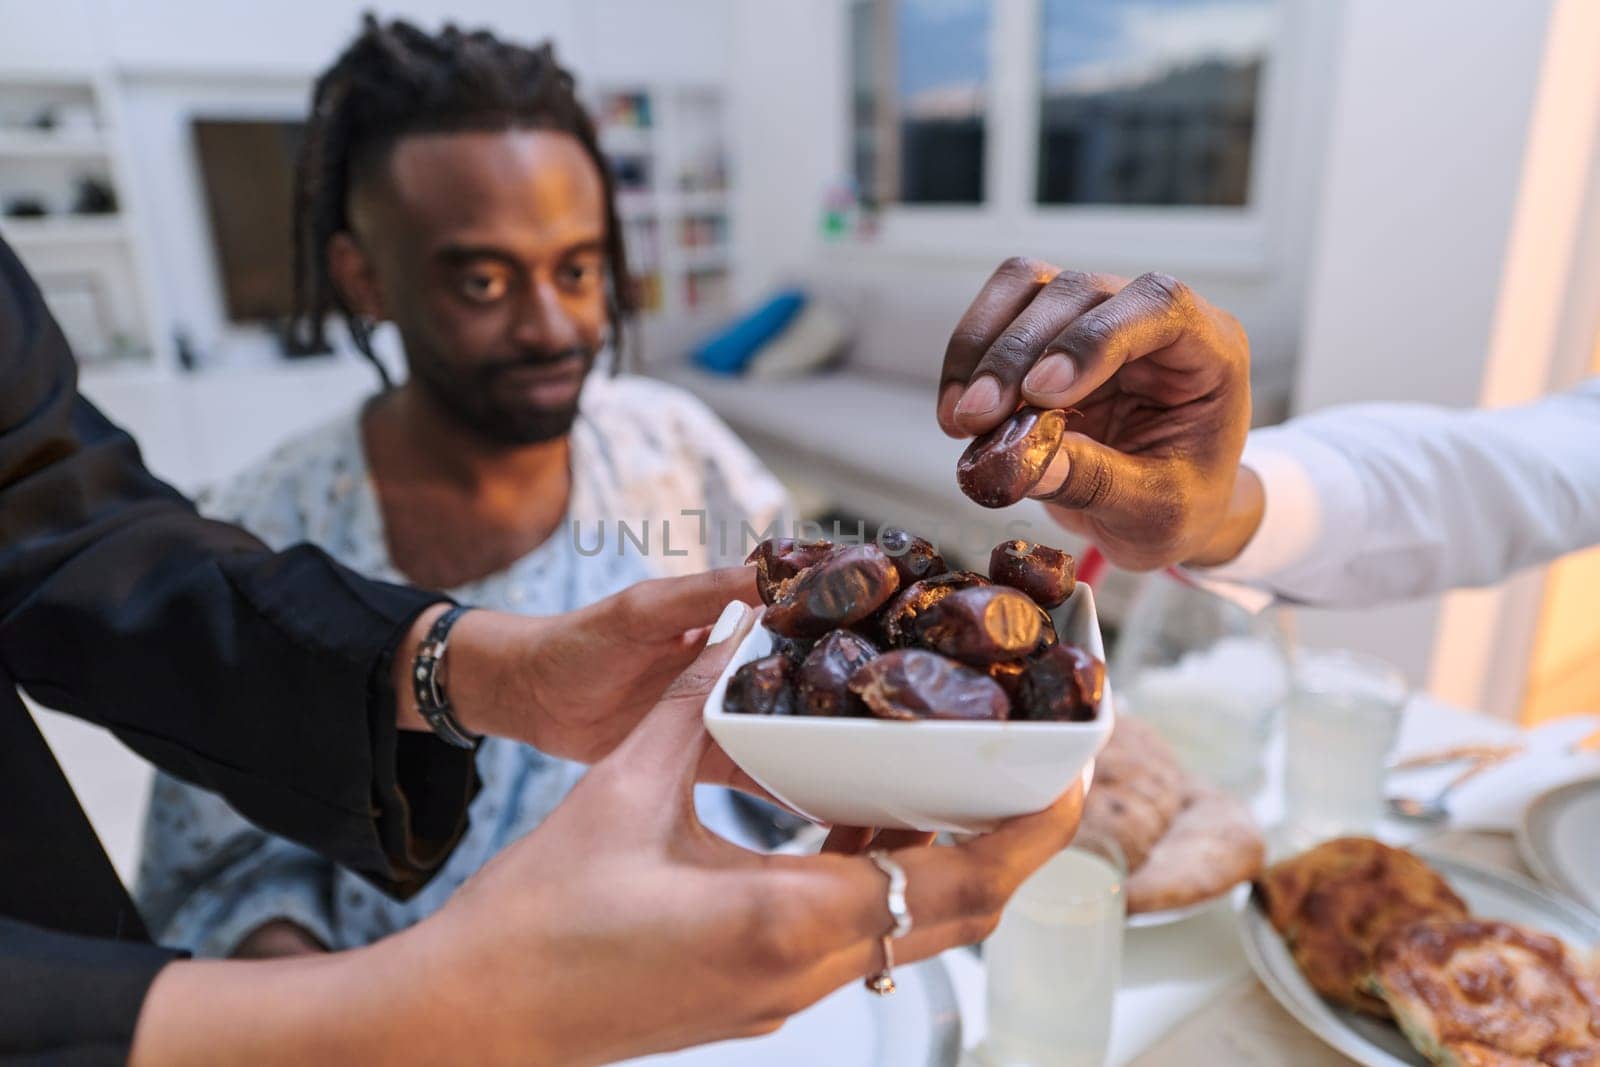 In a poignant close-up, the diverse hands of a Muslim family delicately grasp fresh dates, symbolizing the breaking of the fast during the holy month of Ramadan, capturing a moment of cultural unity, shared tradition, and the joyous anticipation of communal iftar by dotshock